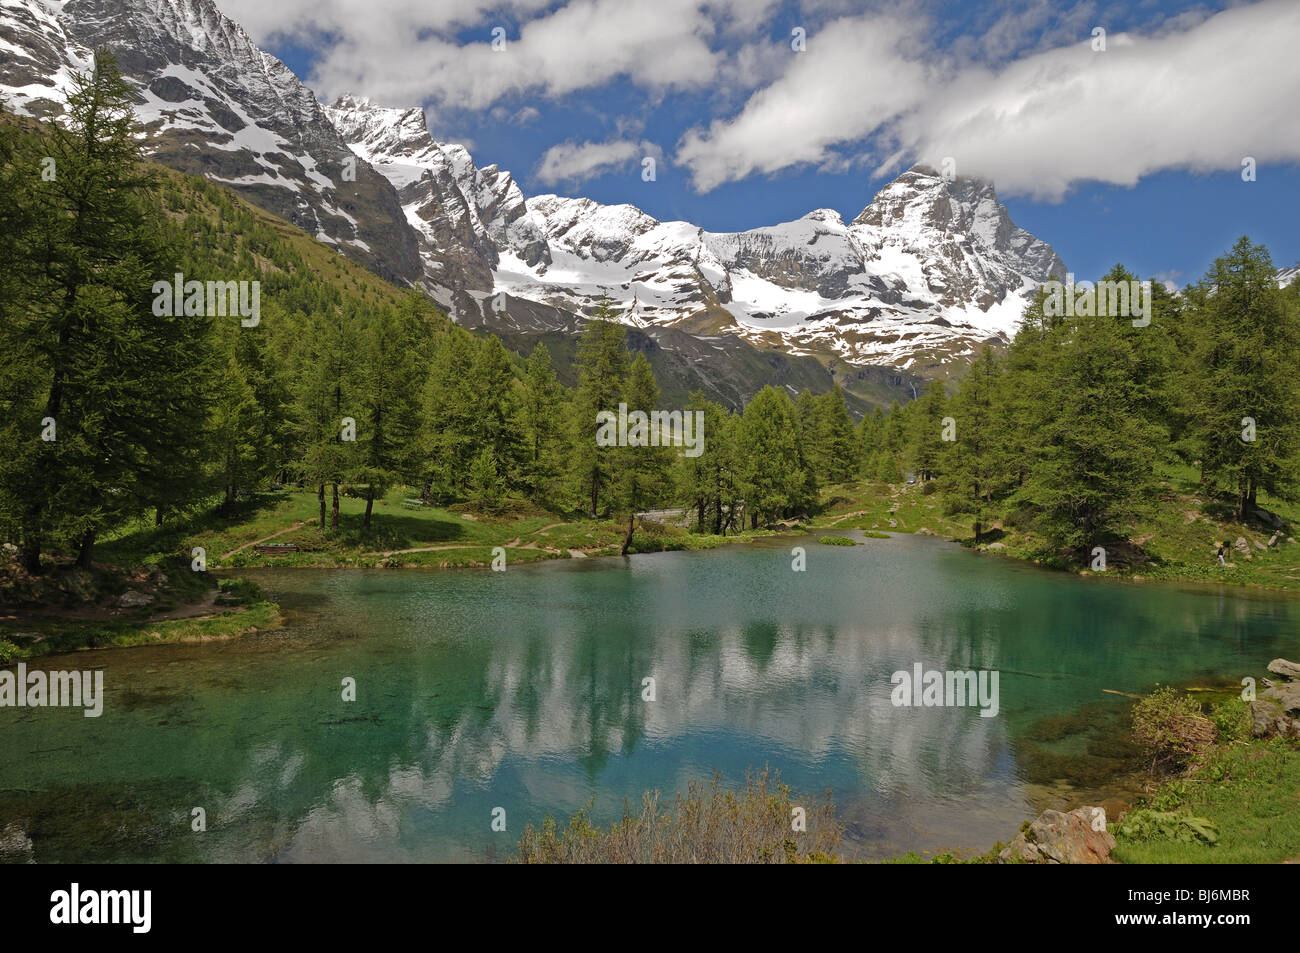 Il Lago Blu or the Blue Lake in Valtournenche Italy with the peak of the Matterhorn or Il Cervino in the background Stock Photo